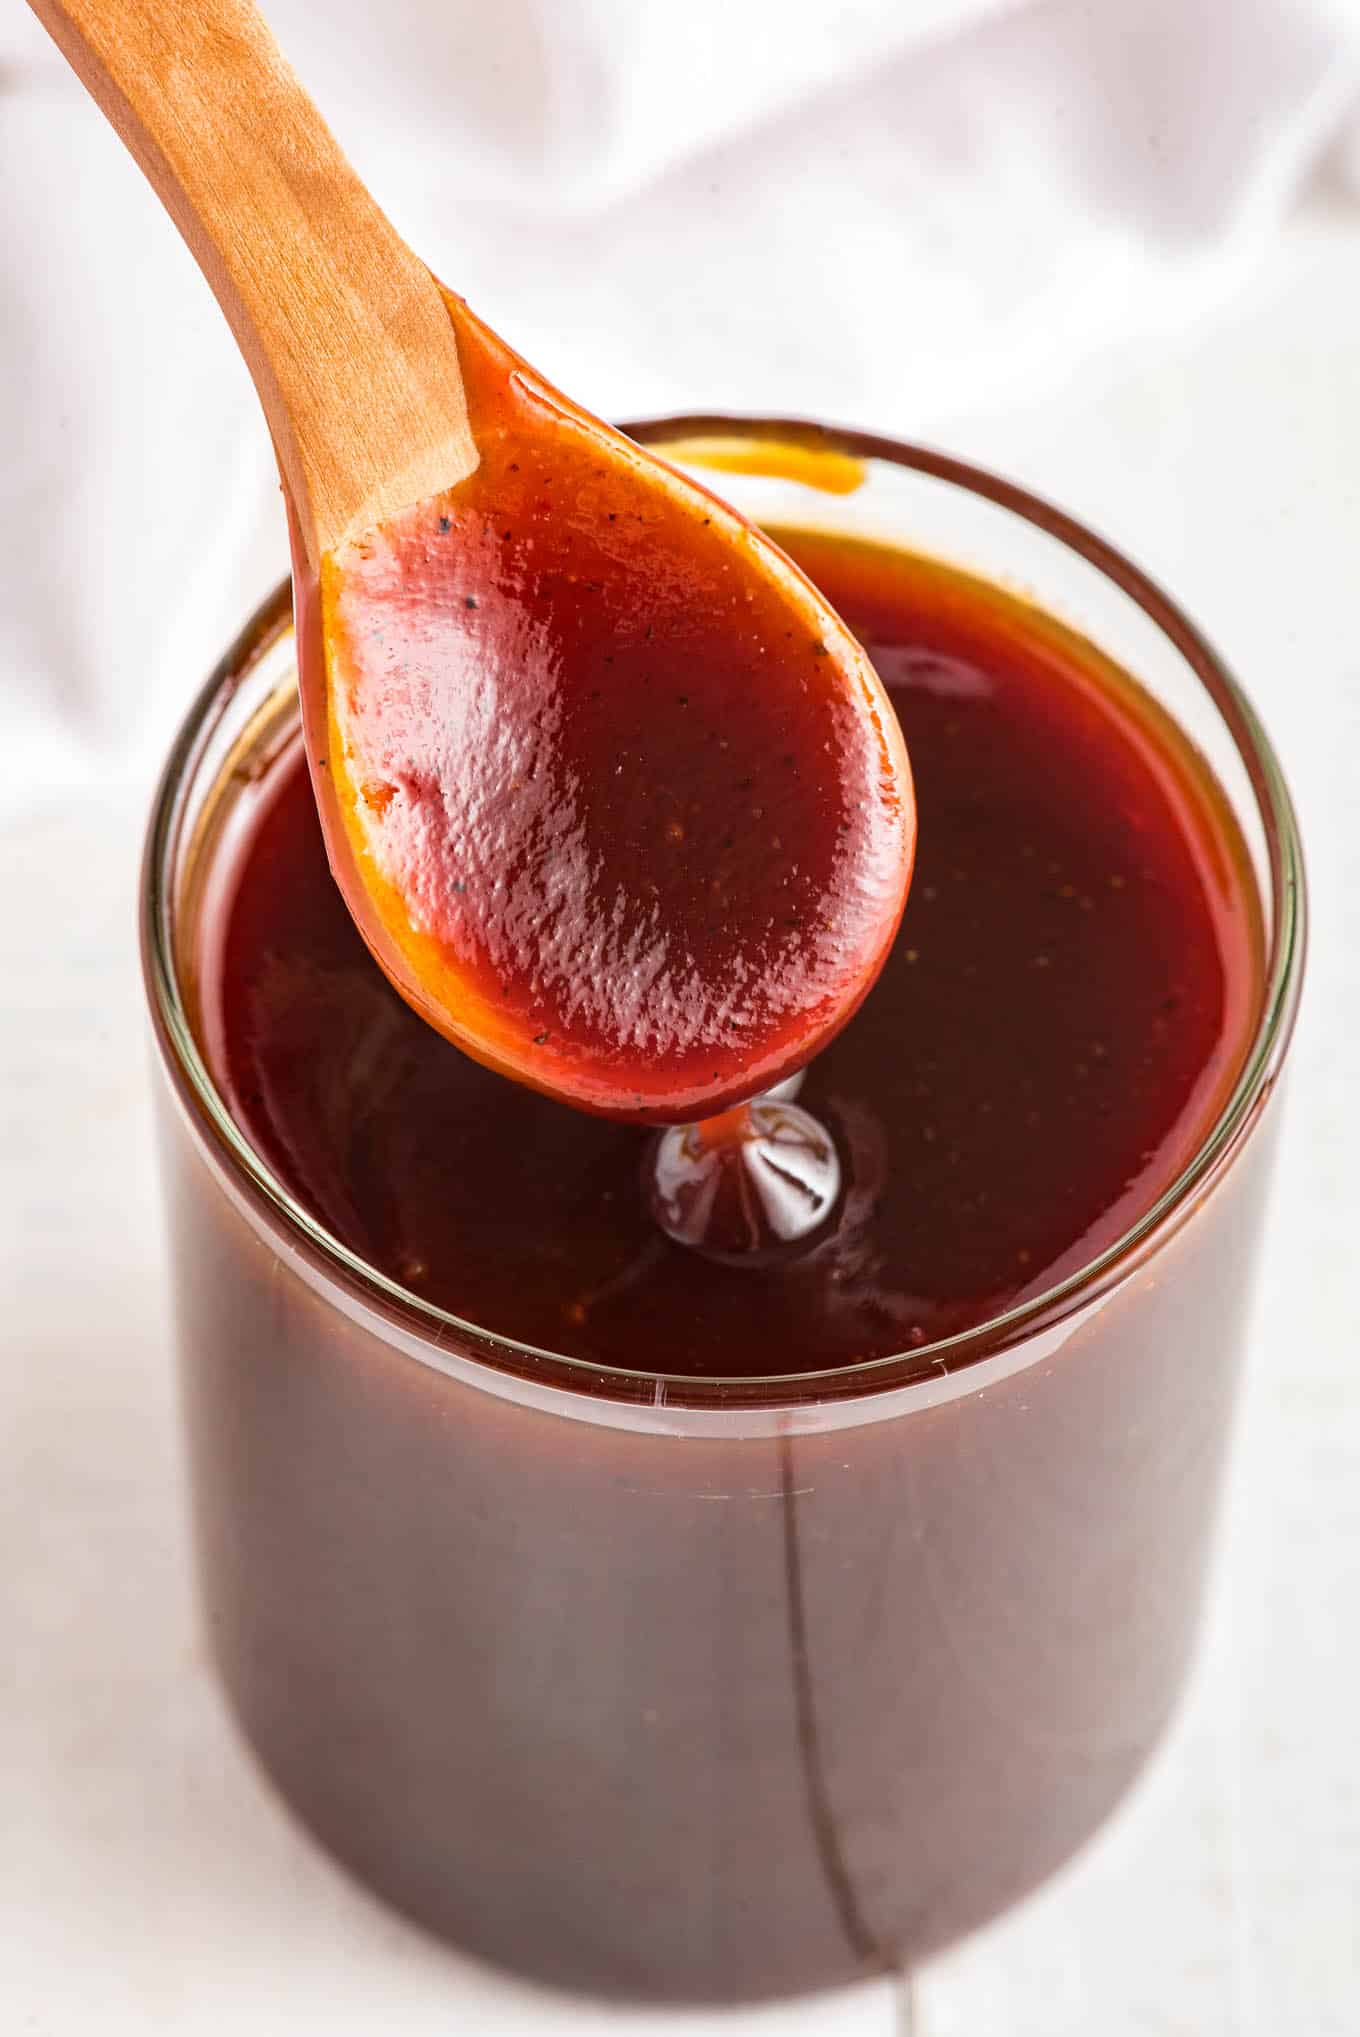 A spoon up over the jar of BBQ sauce with a bit of the sauce in it.